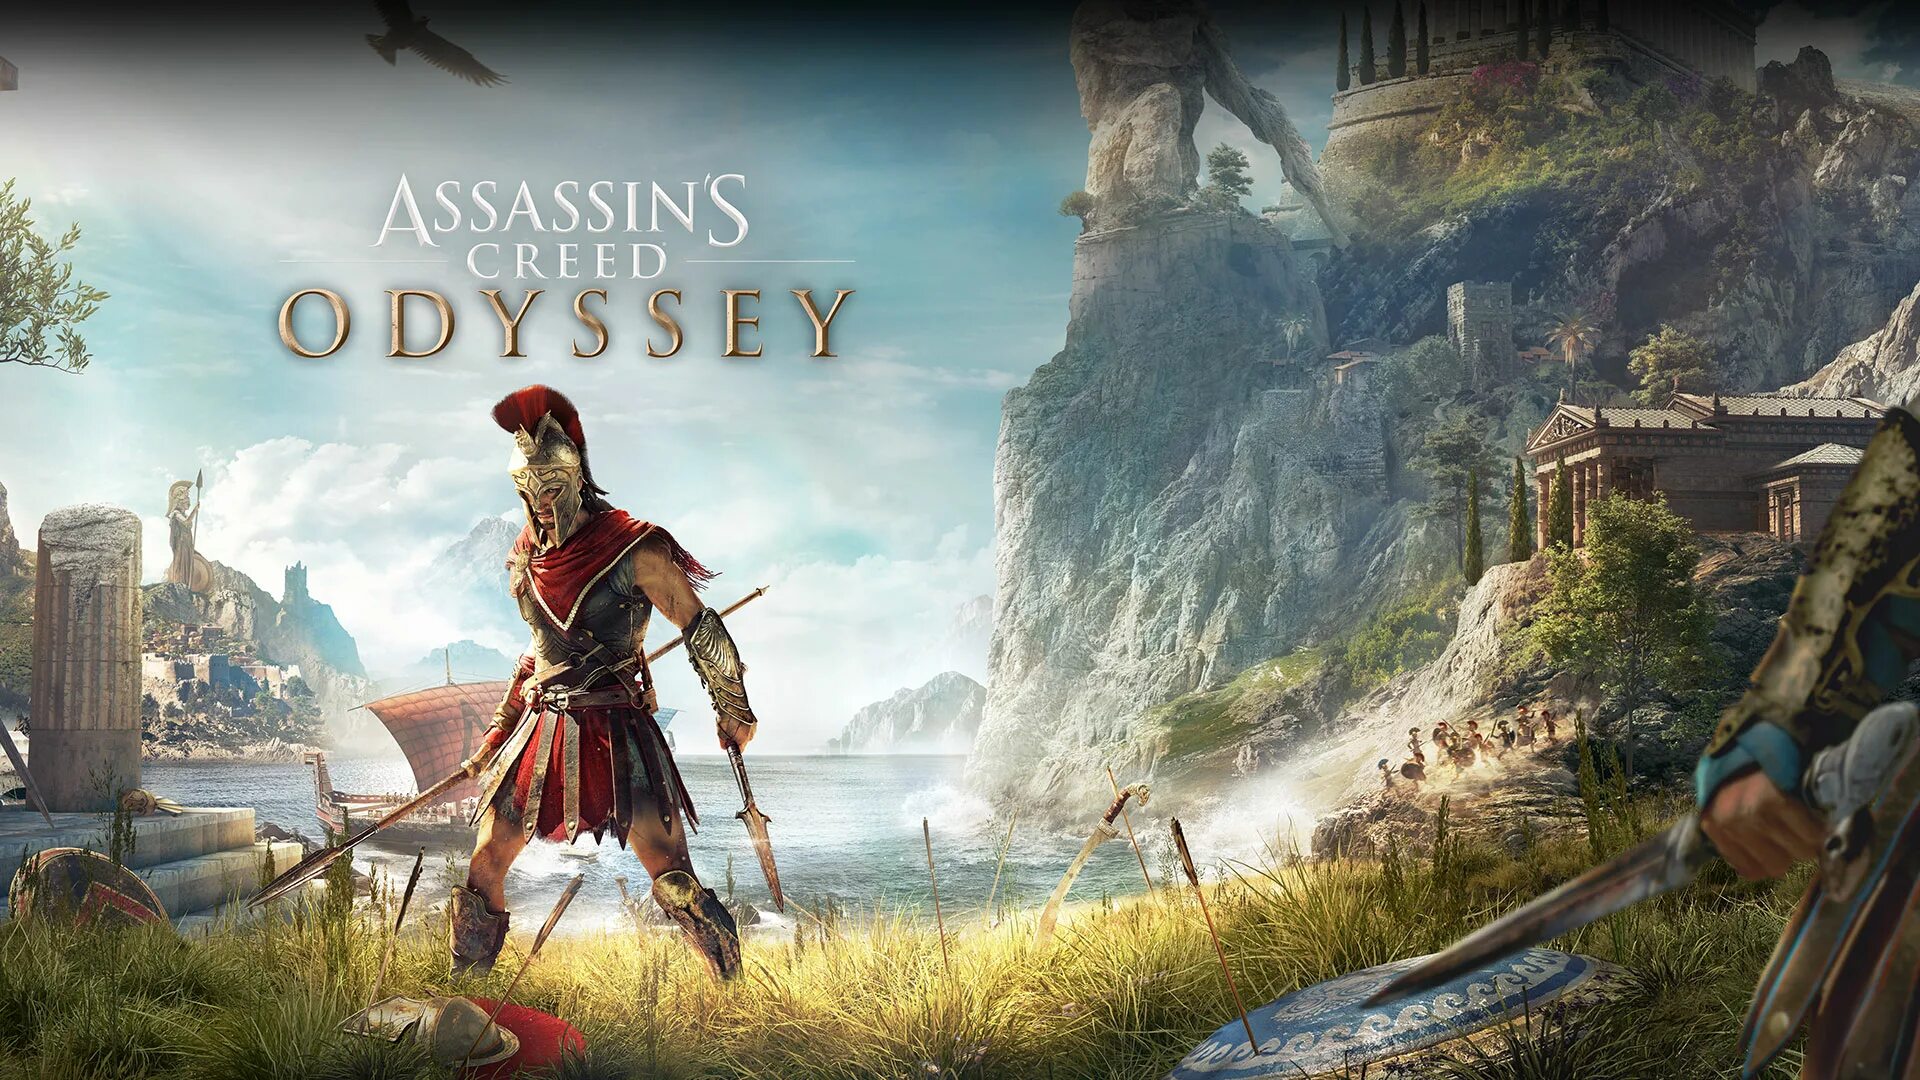 Assassin's Creed Odyssey Xbox. Ассасин Крид Одиссея 1. Assassin's Creed® Odyssey - Gold Edition. Assassins Creed Одиссея Gold Edition.